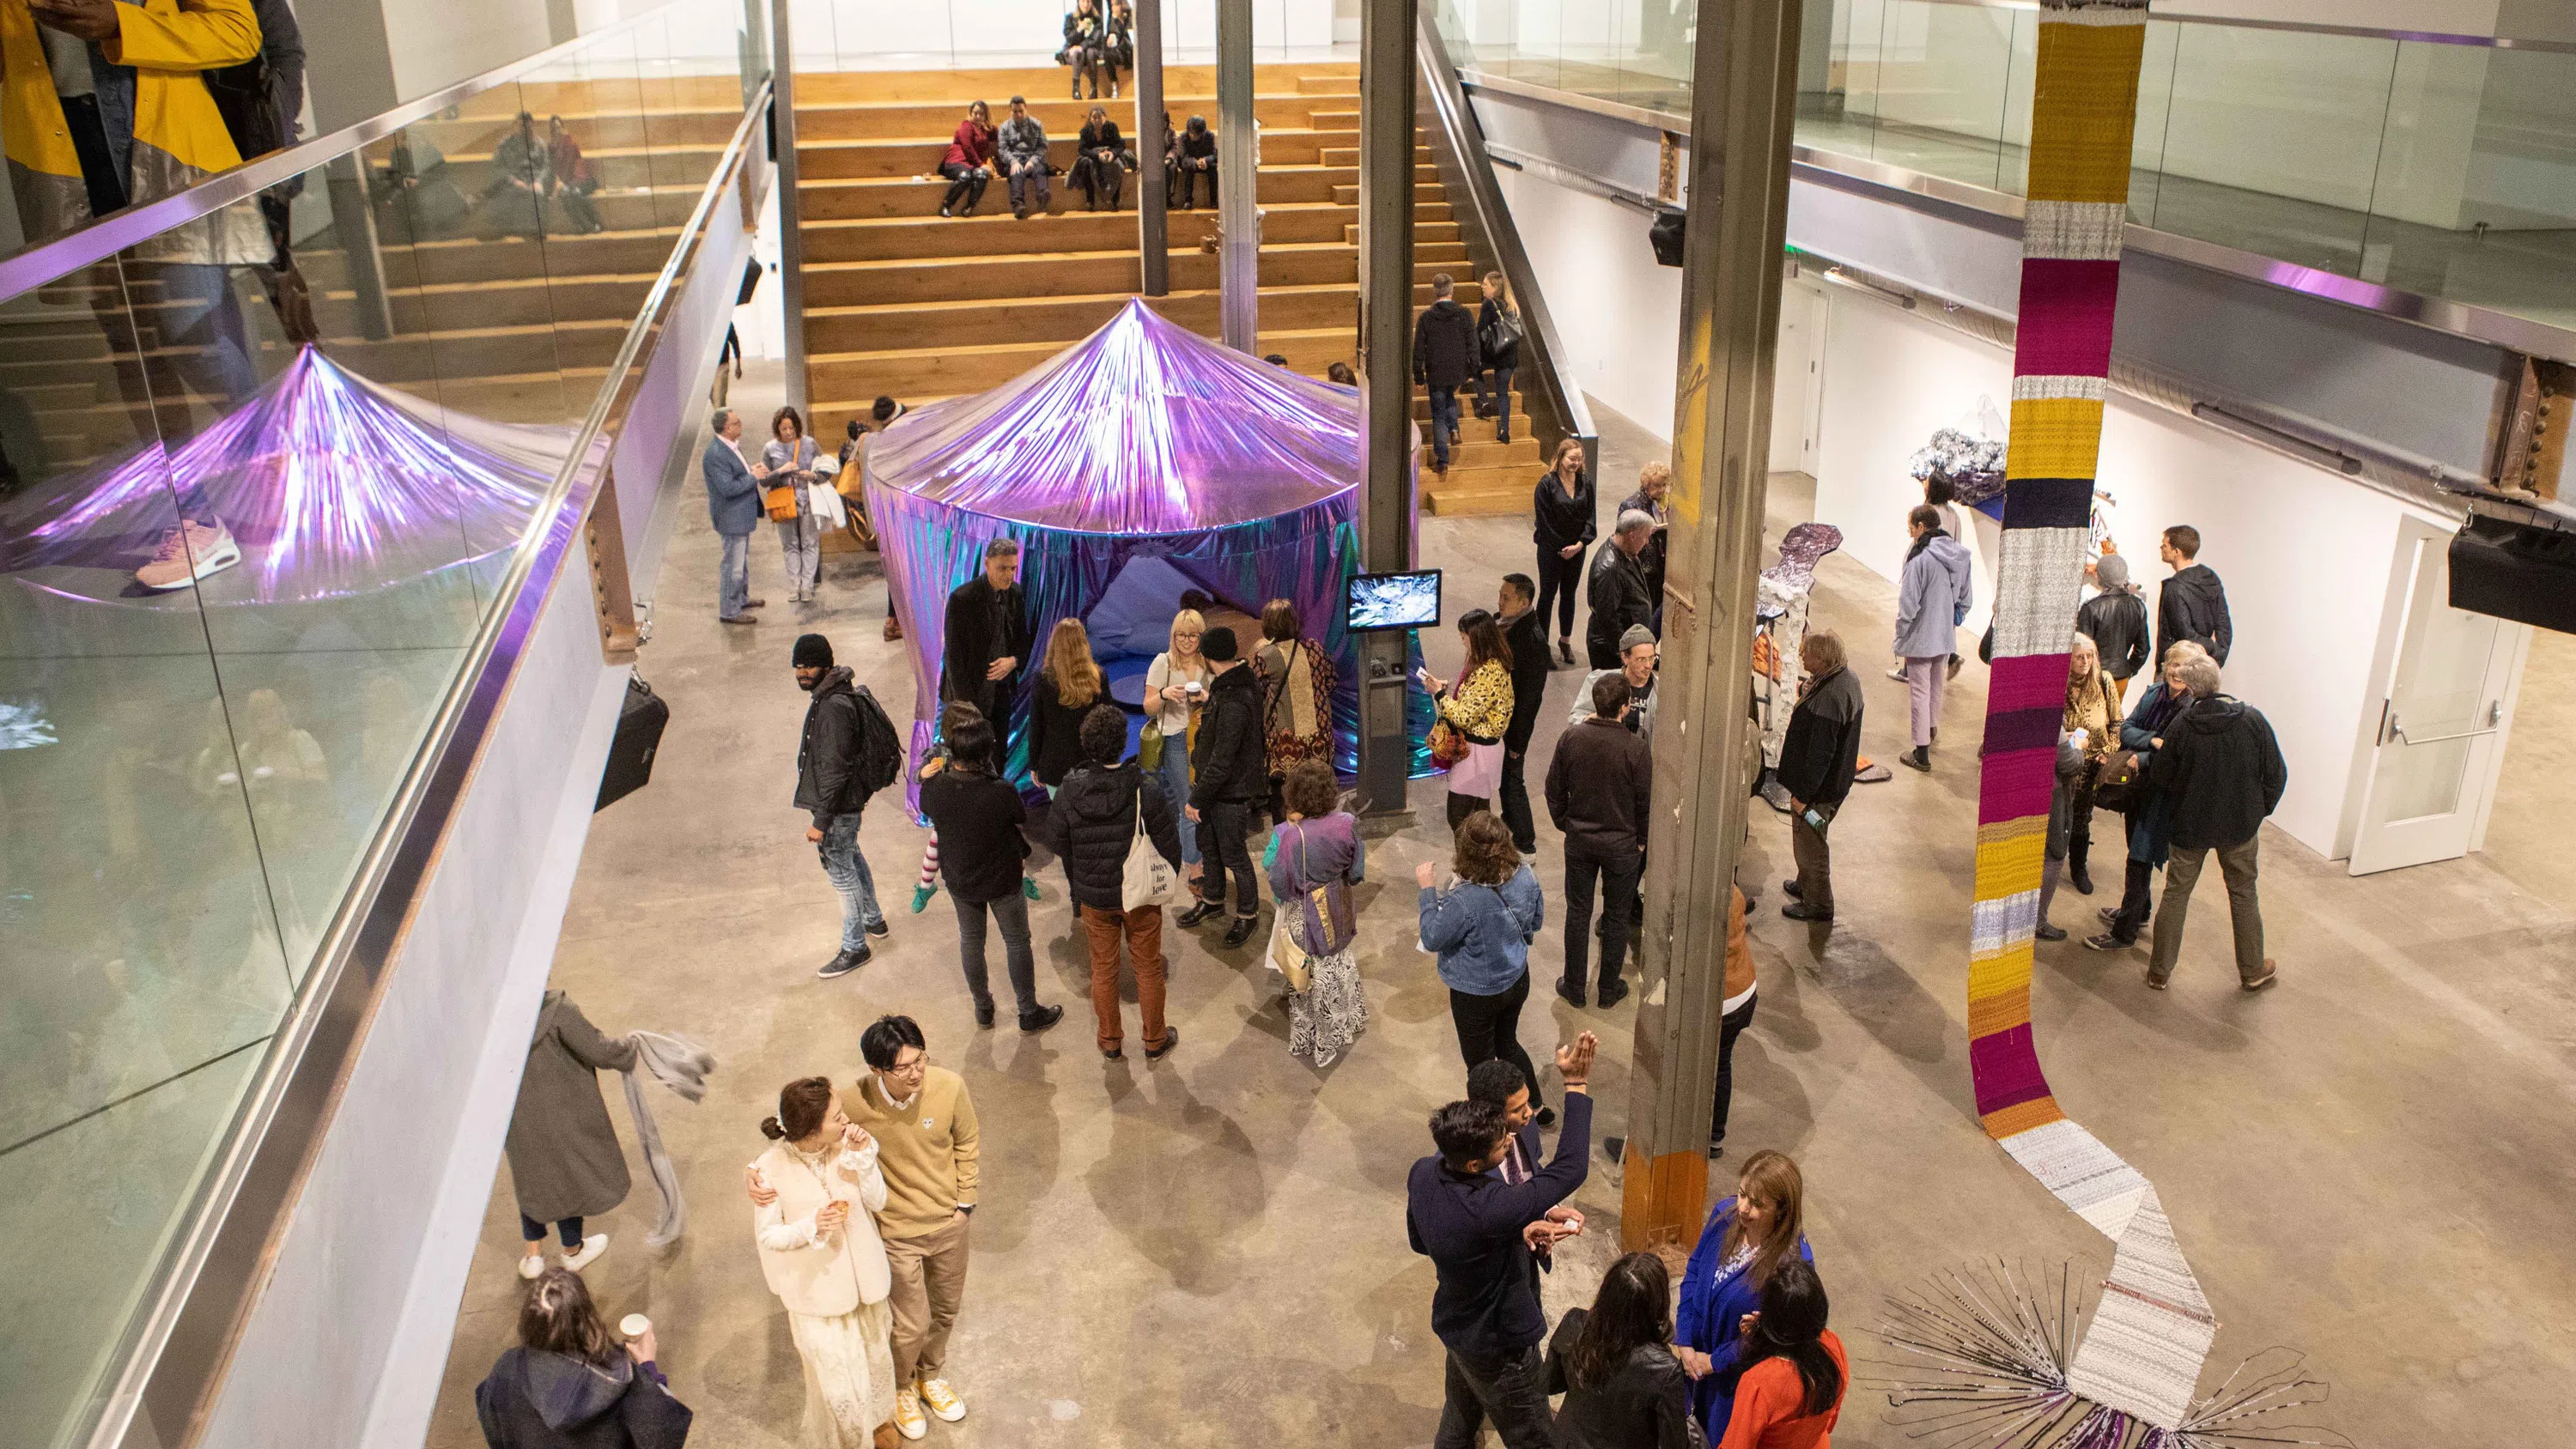 Bird’s eye view of art and people in the atrium of Minnesota Street Project.